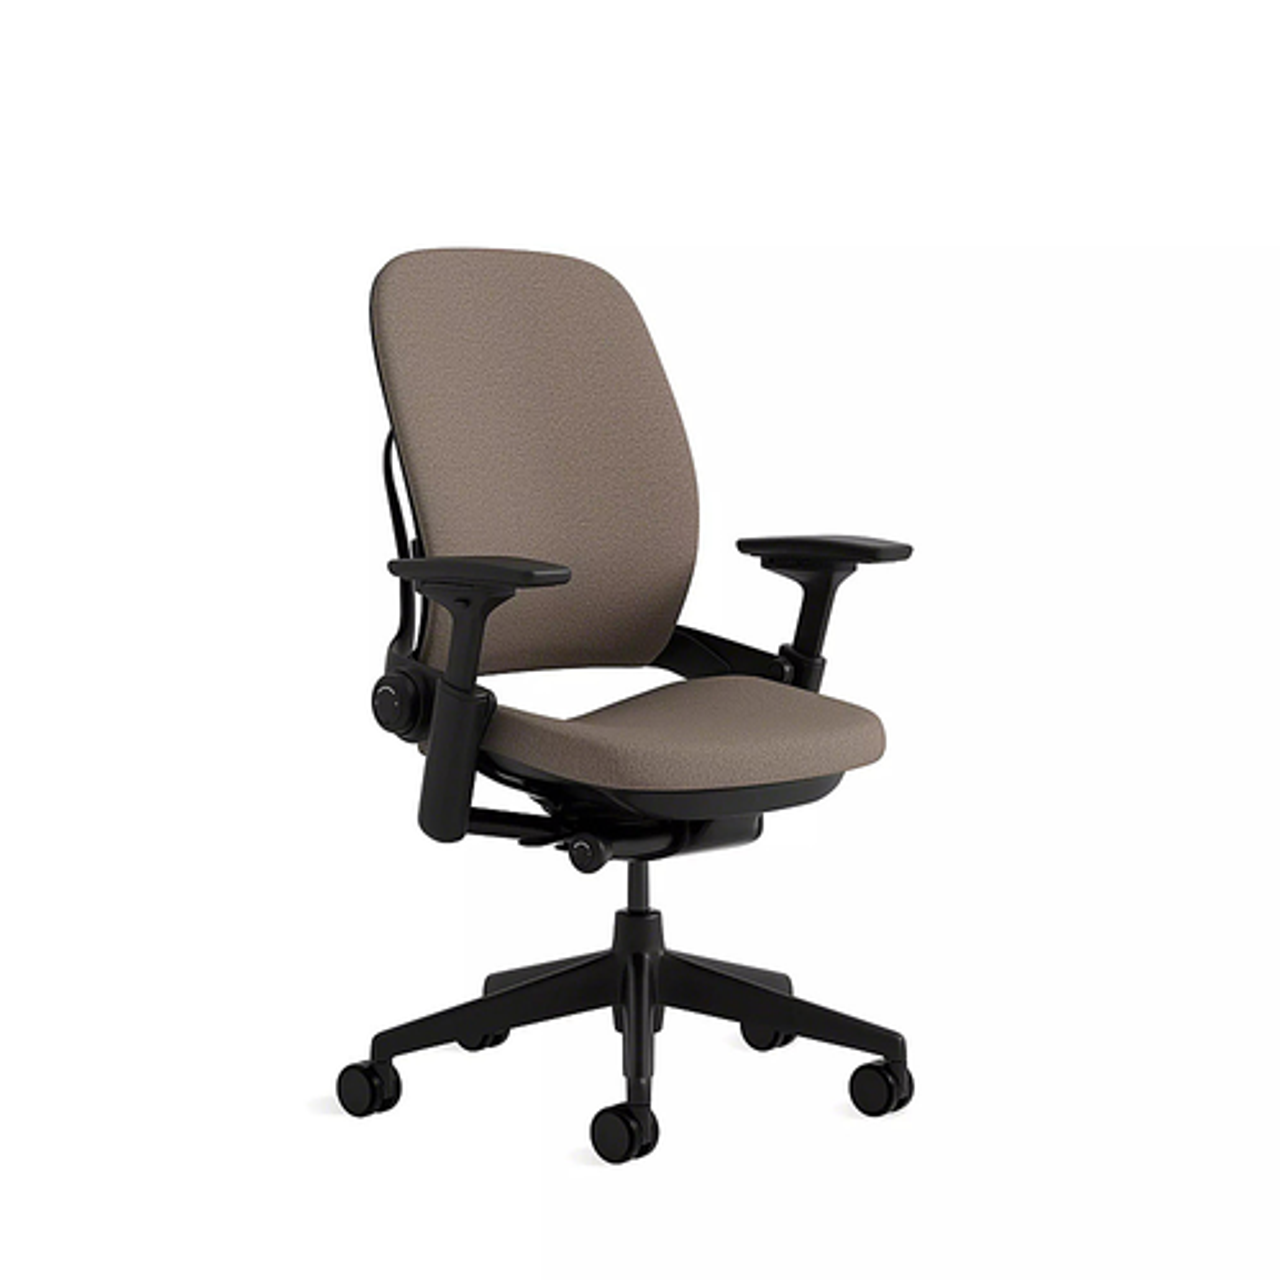 Steelcase - Leap Office Chair in Truffle Fabric with Hard Floor Casters